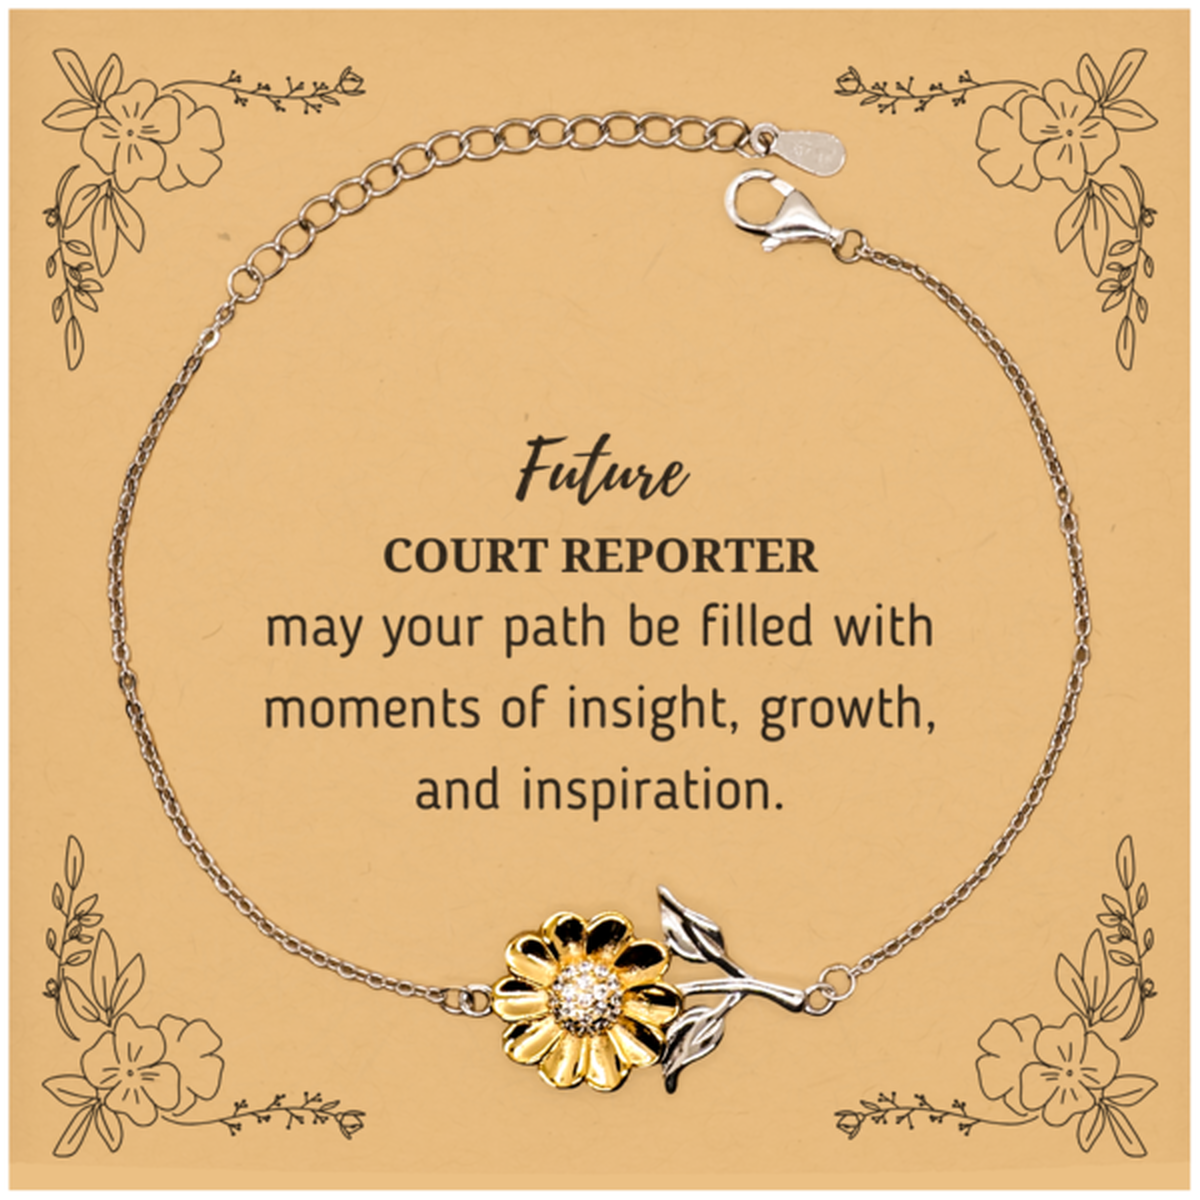 Future Court Reporter Gifts, May your path be filled with moments of insight, Graduation Gifts for New Court Reporter, Christmas Unique Sunflower Bracelet For Men, Women, Friends